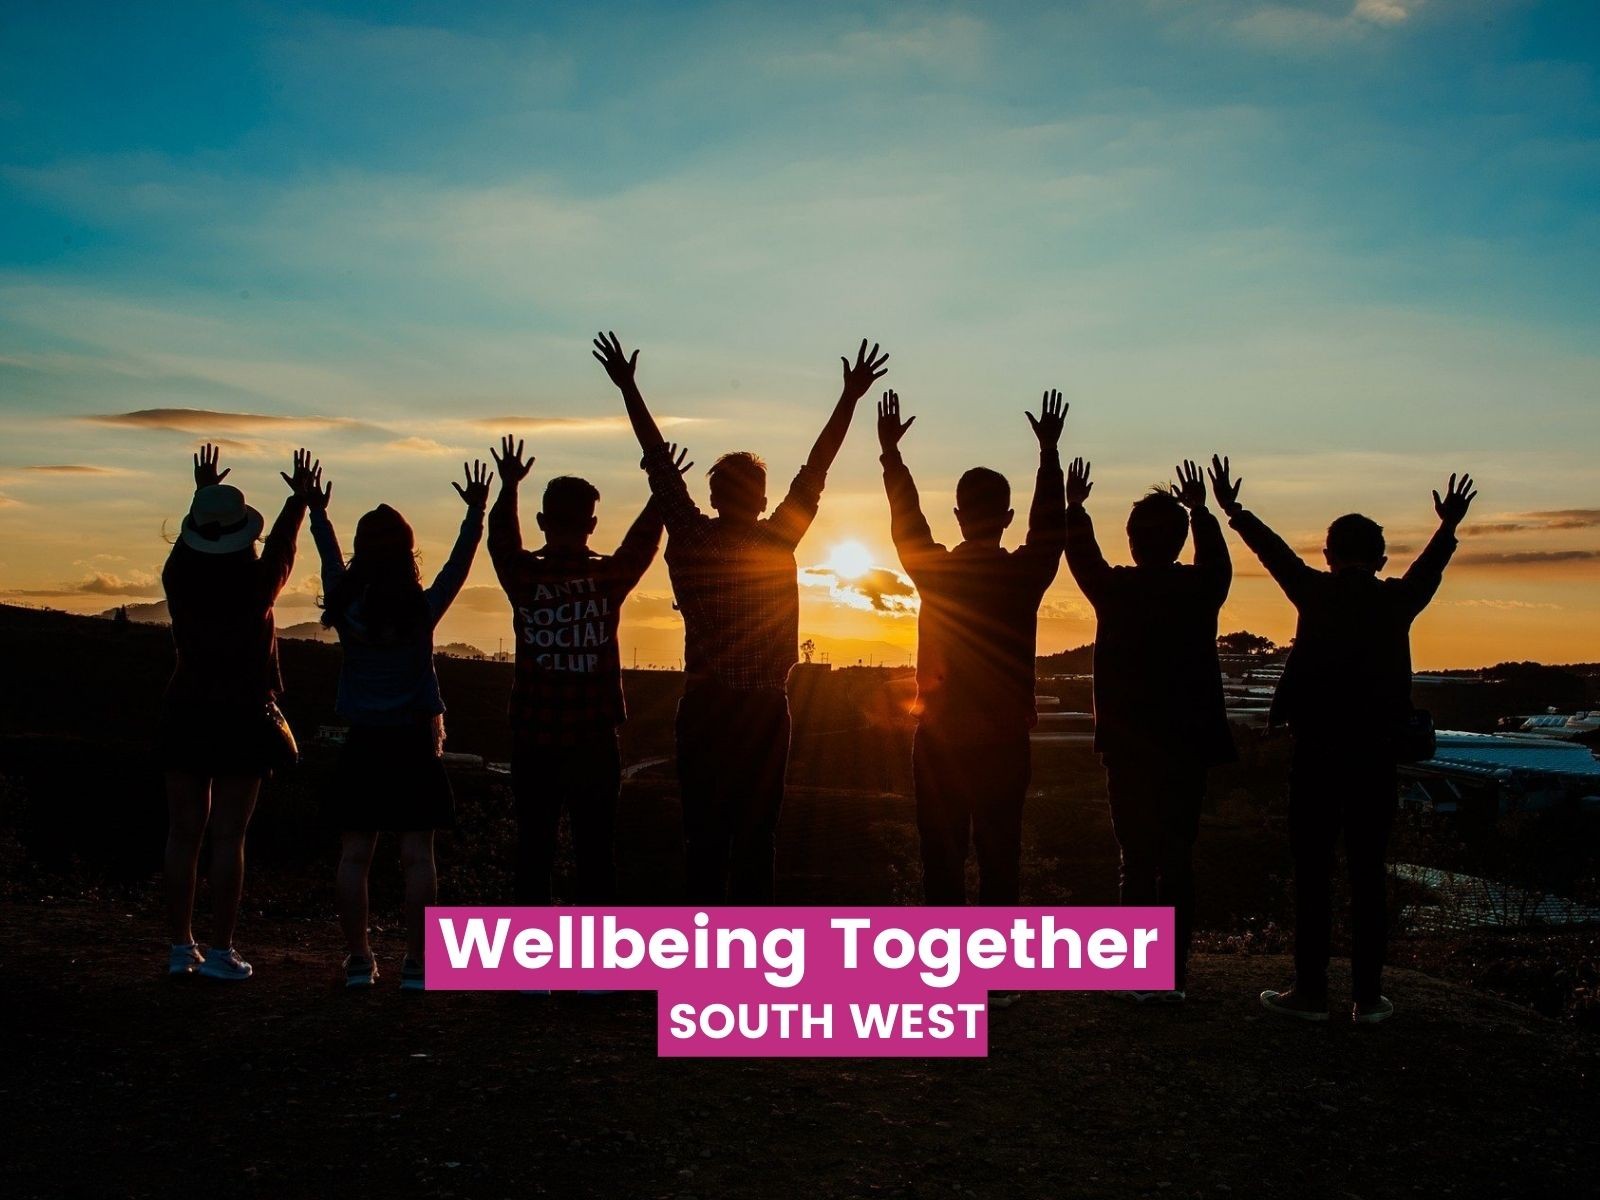  » WELLBEING TOGETHER: NEW MENTAL HEALTH PARTNERSHIP LAUNCHED!